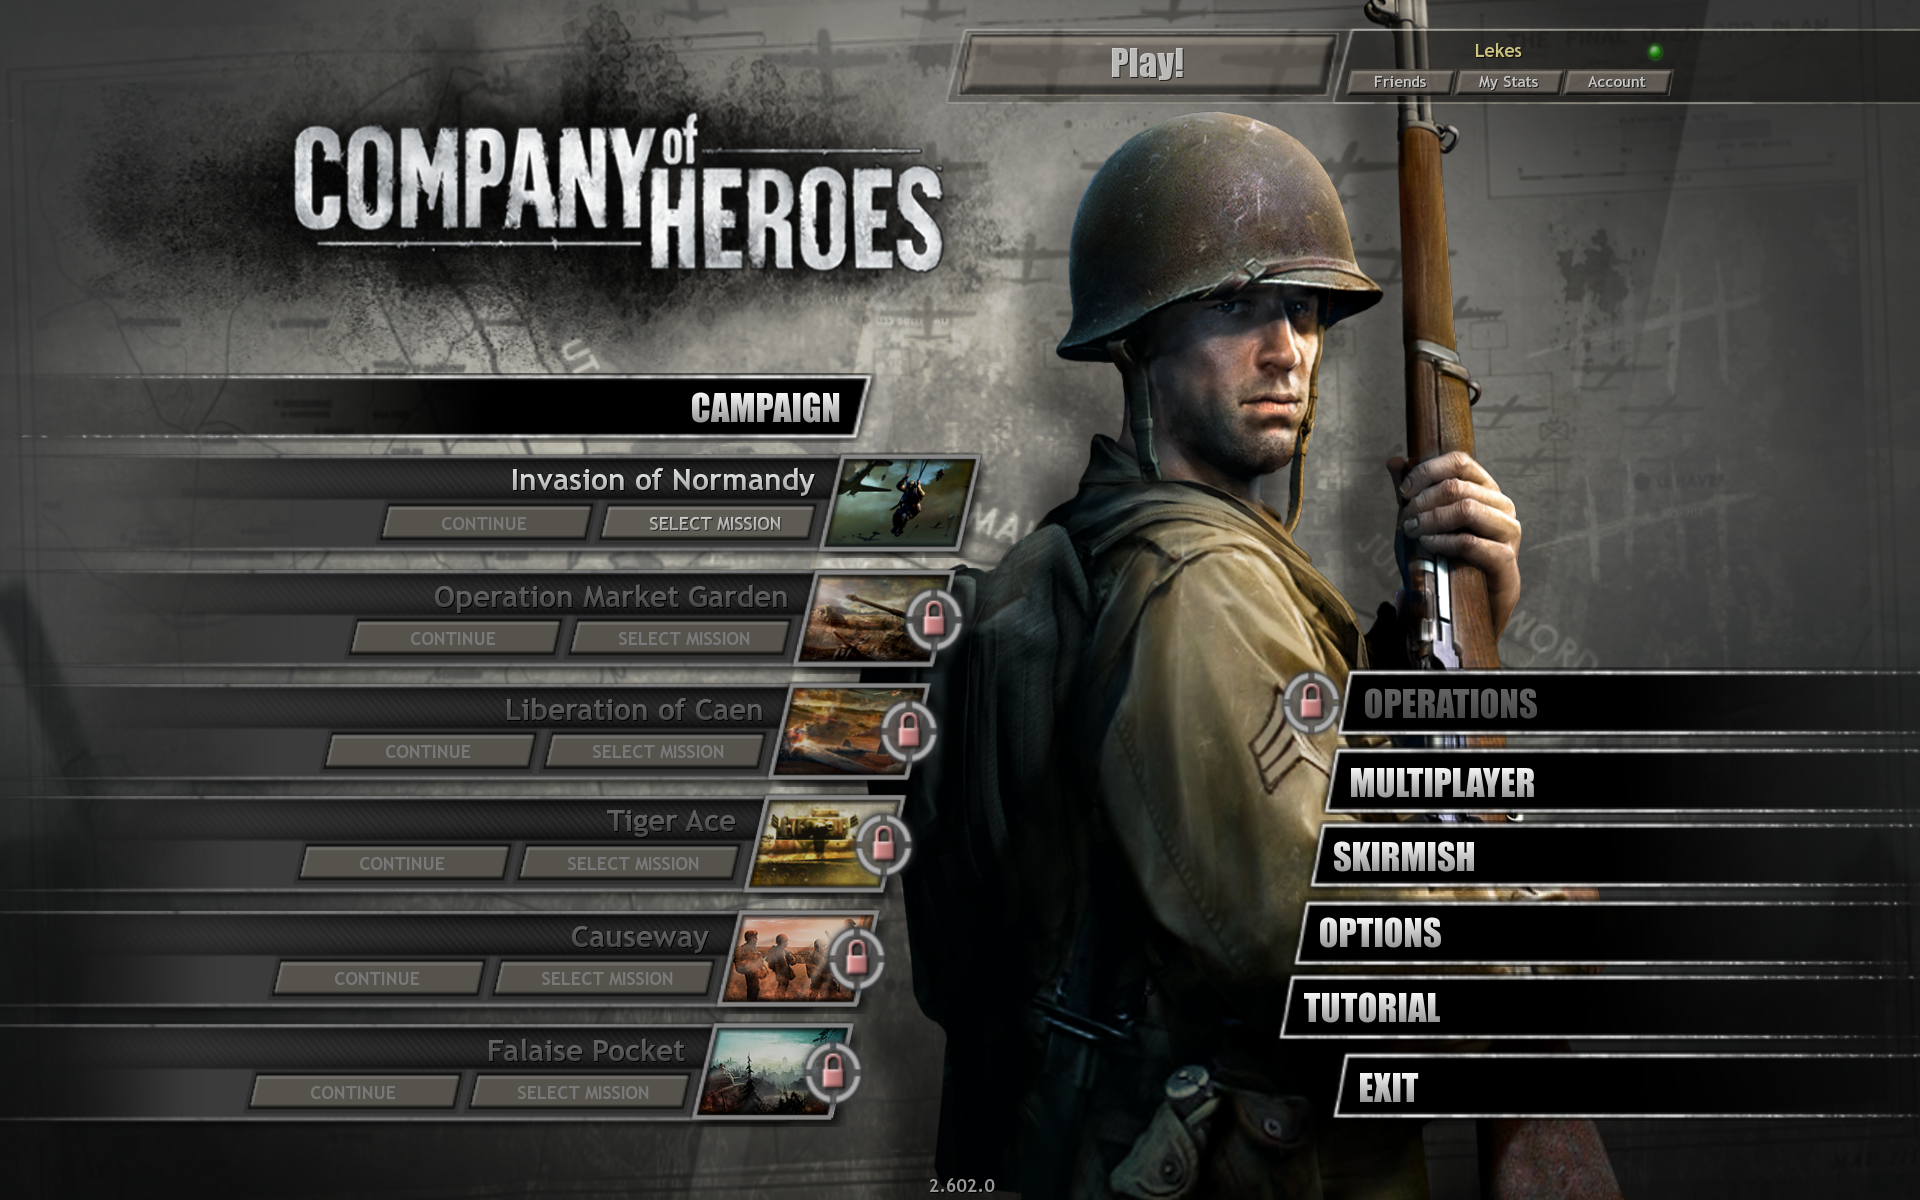 Company of heroes dlc. Company of Heroes 1 меню. Company of Heroes 3 диск. Company of Heroes 2 главное меню. Company of Heroes Tales of Valor 2.